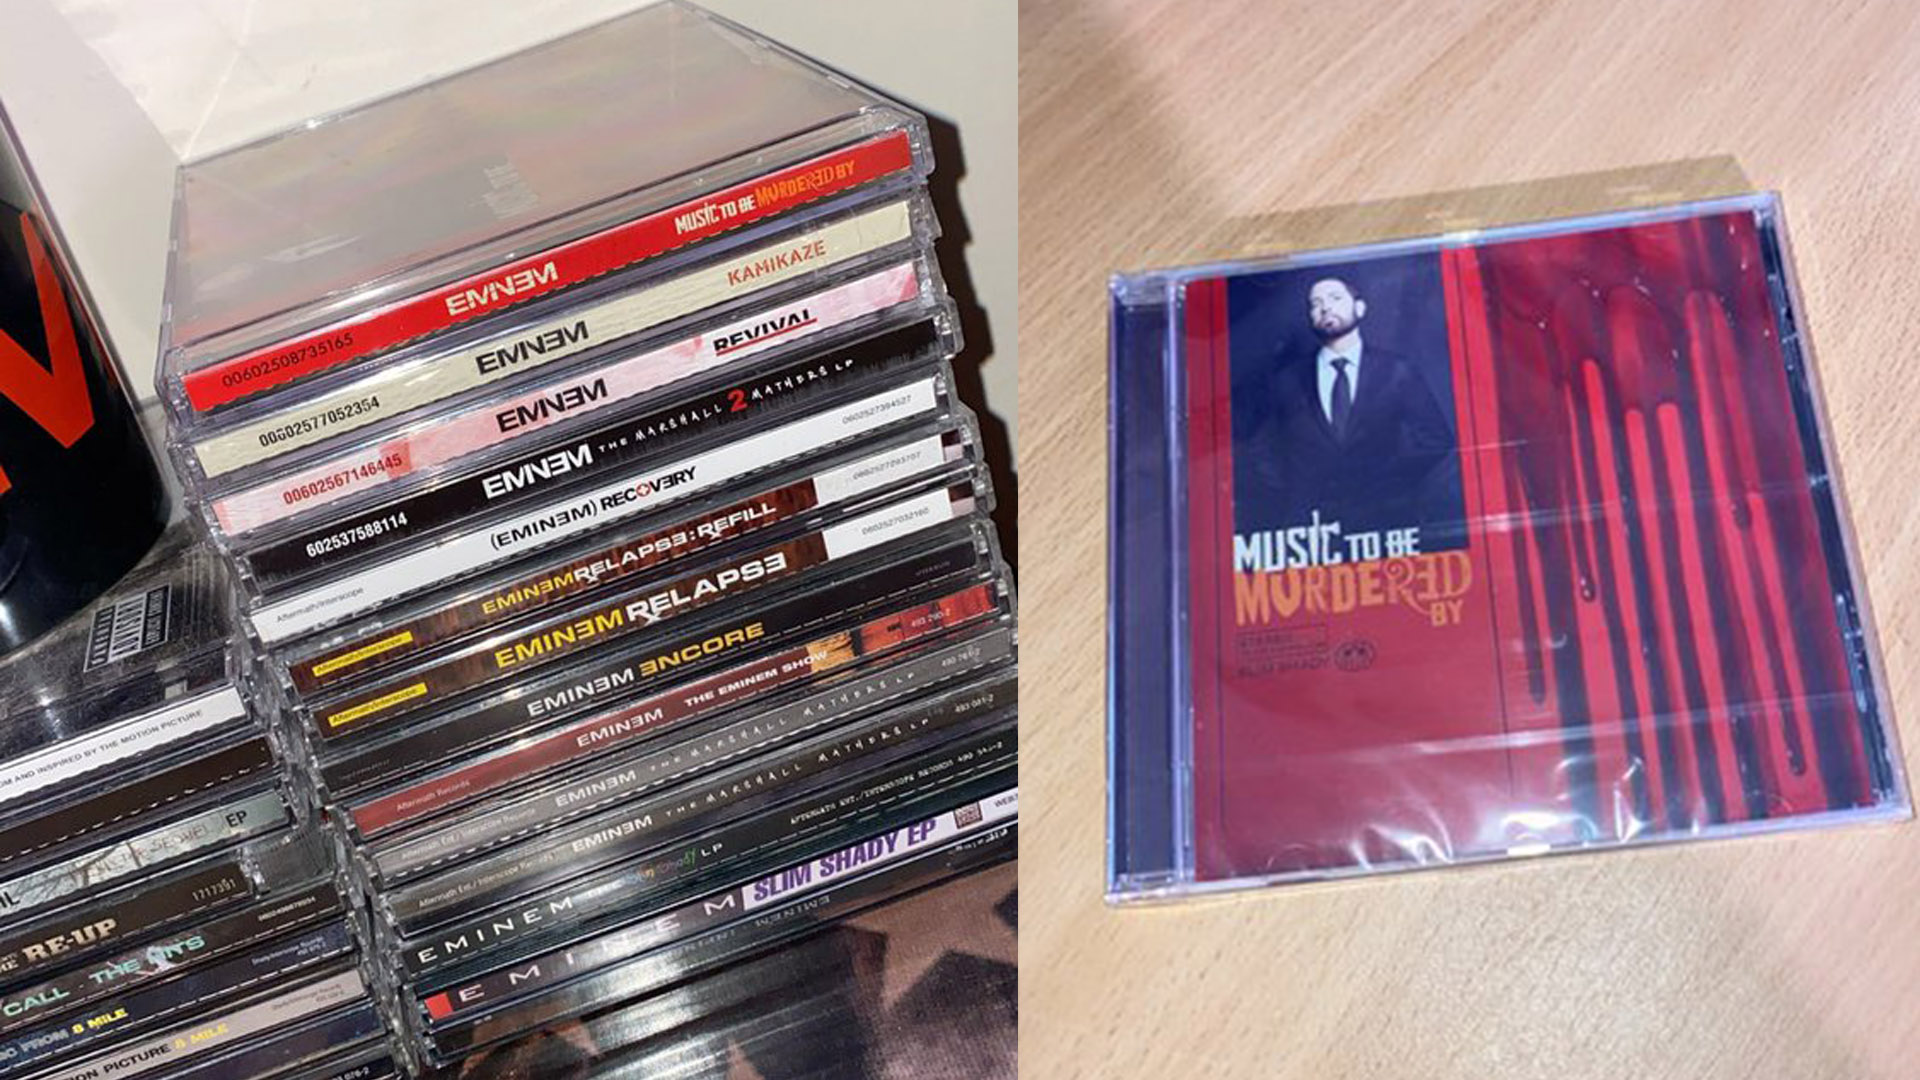 See Pictures of Eminem's “Music To Be Murdered By” Album CD And Booklet